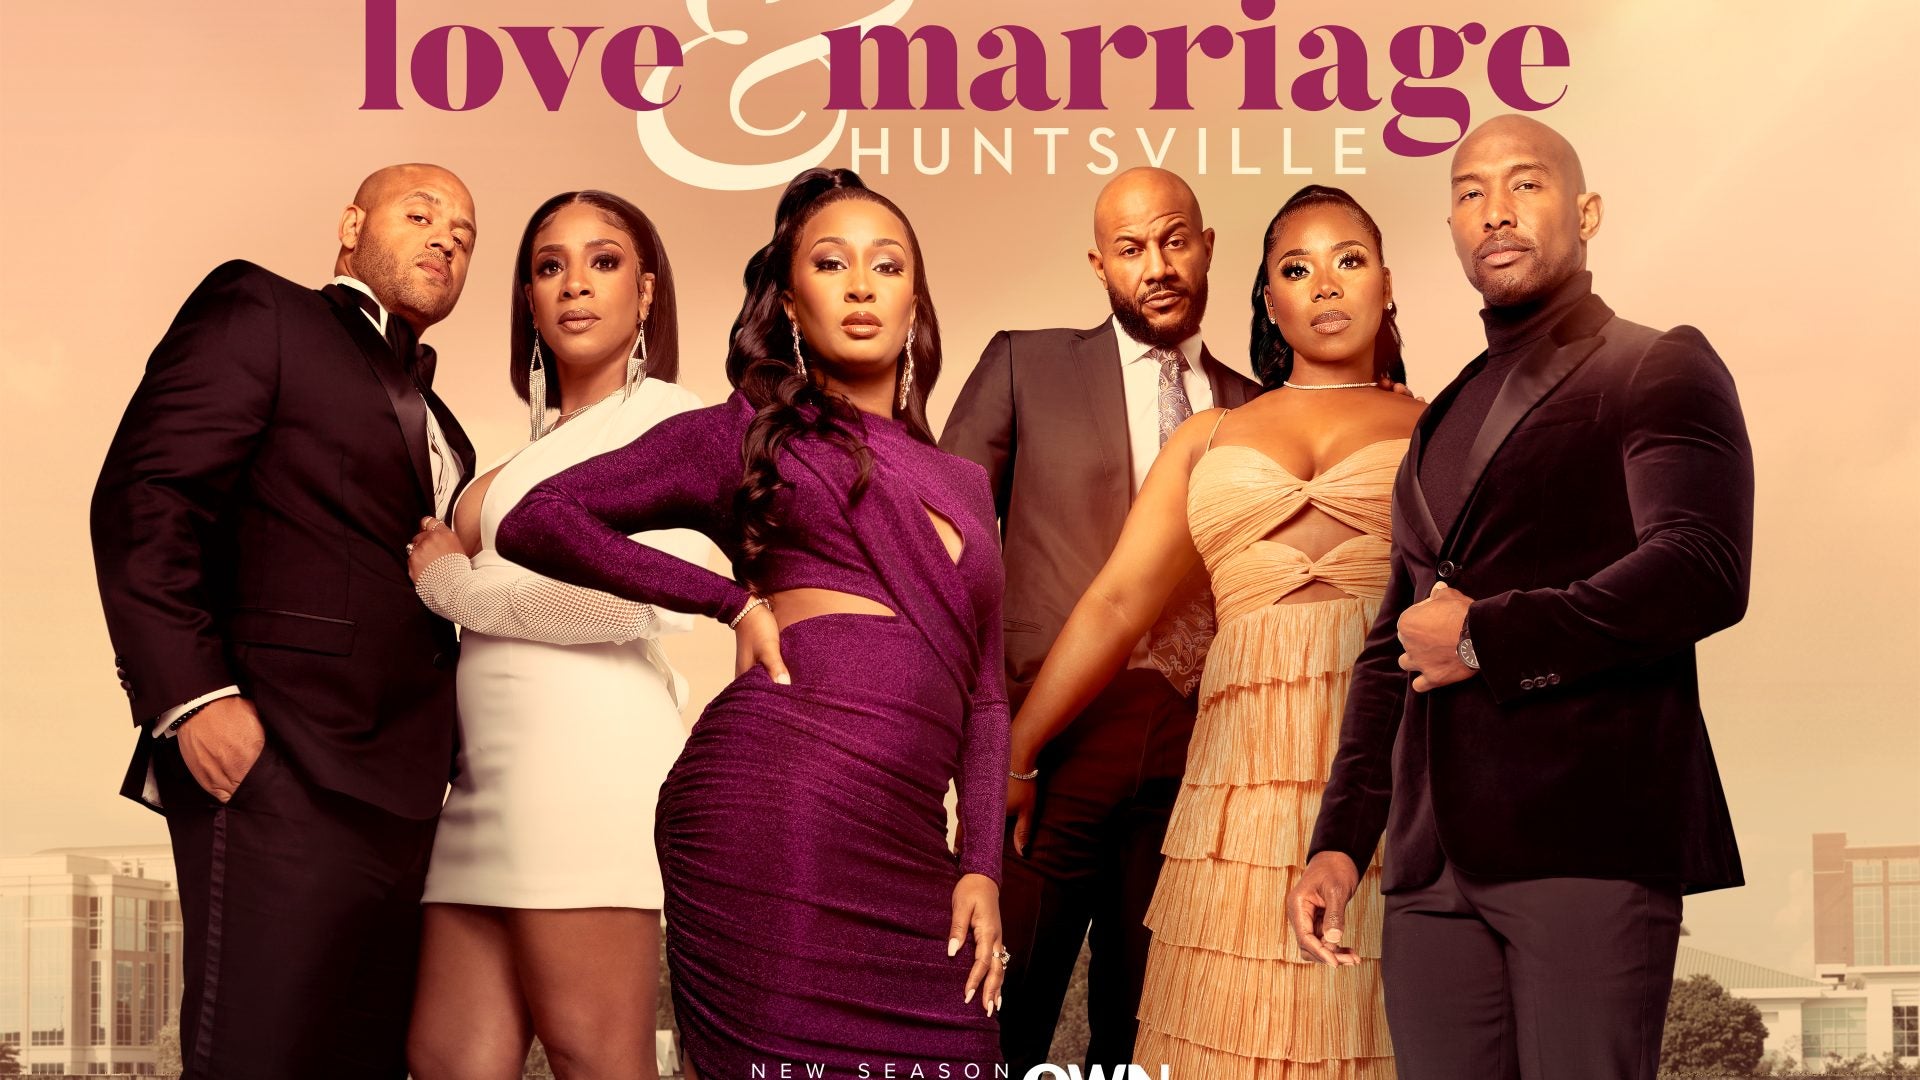 Get A First Look At OWN's New Spinoff ‘Love & Marriage: DC’